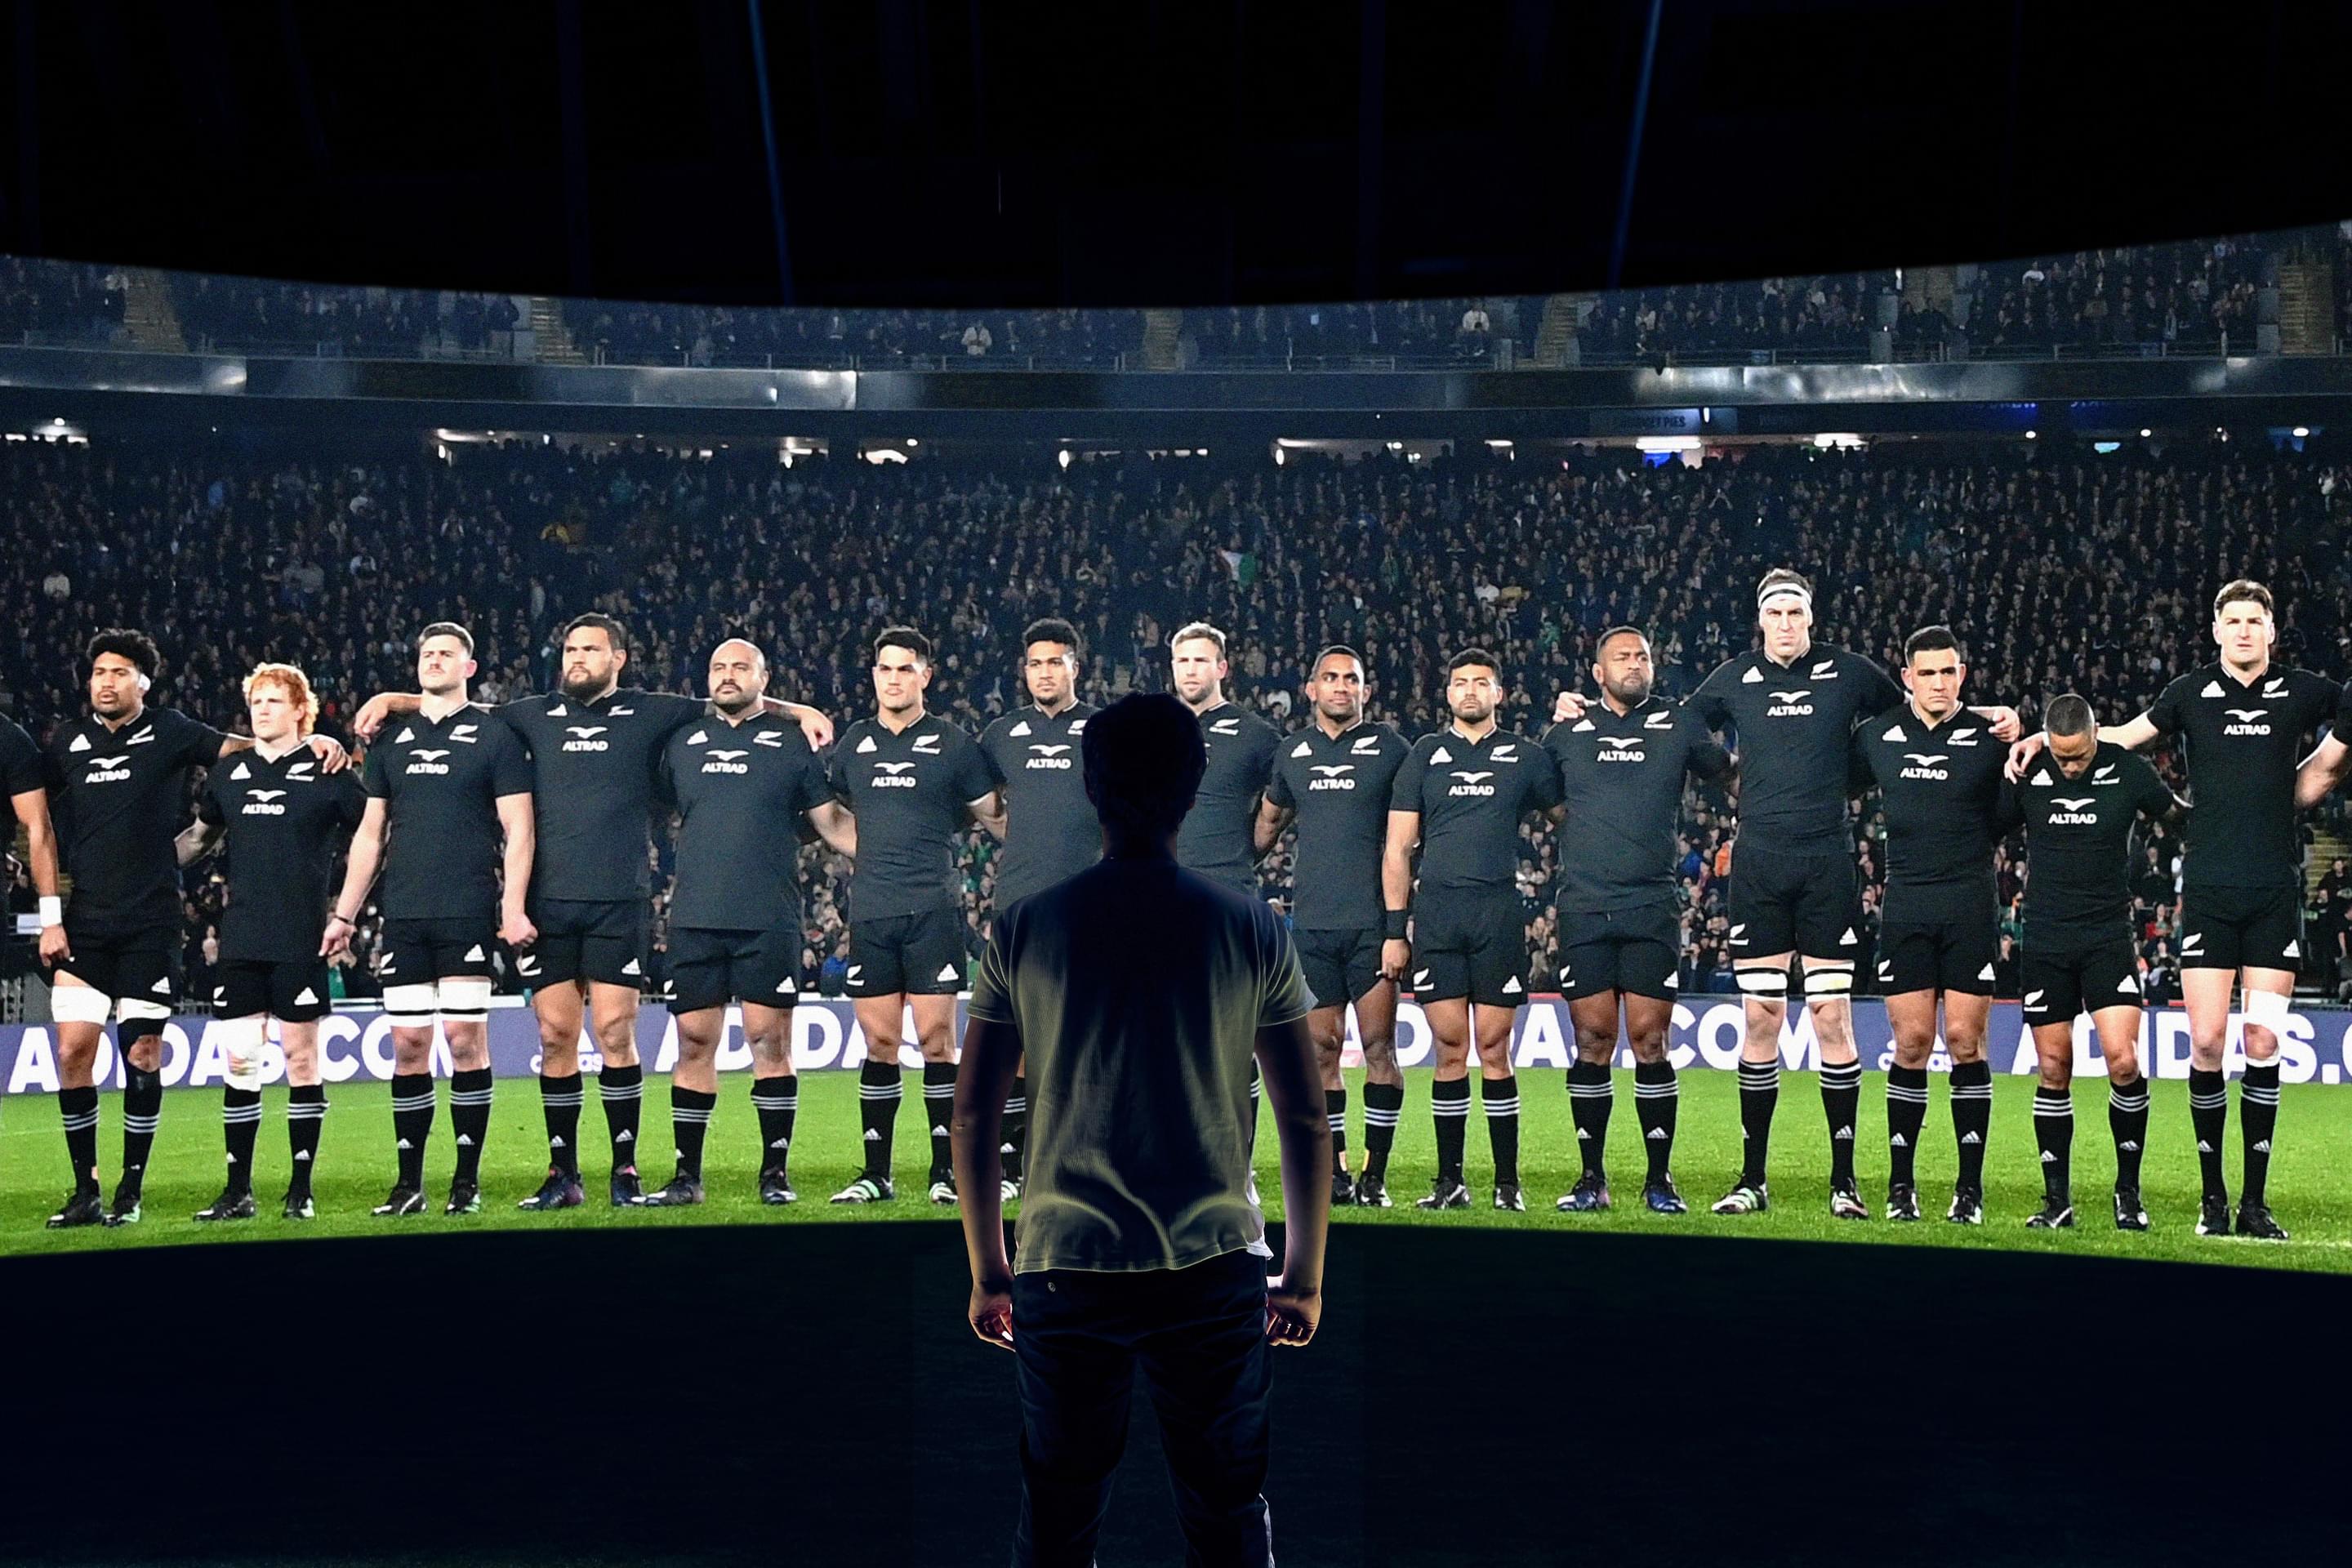 All Blacks Experience Overview